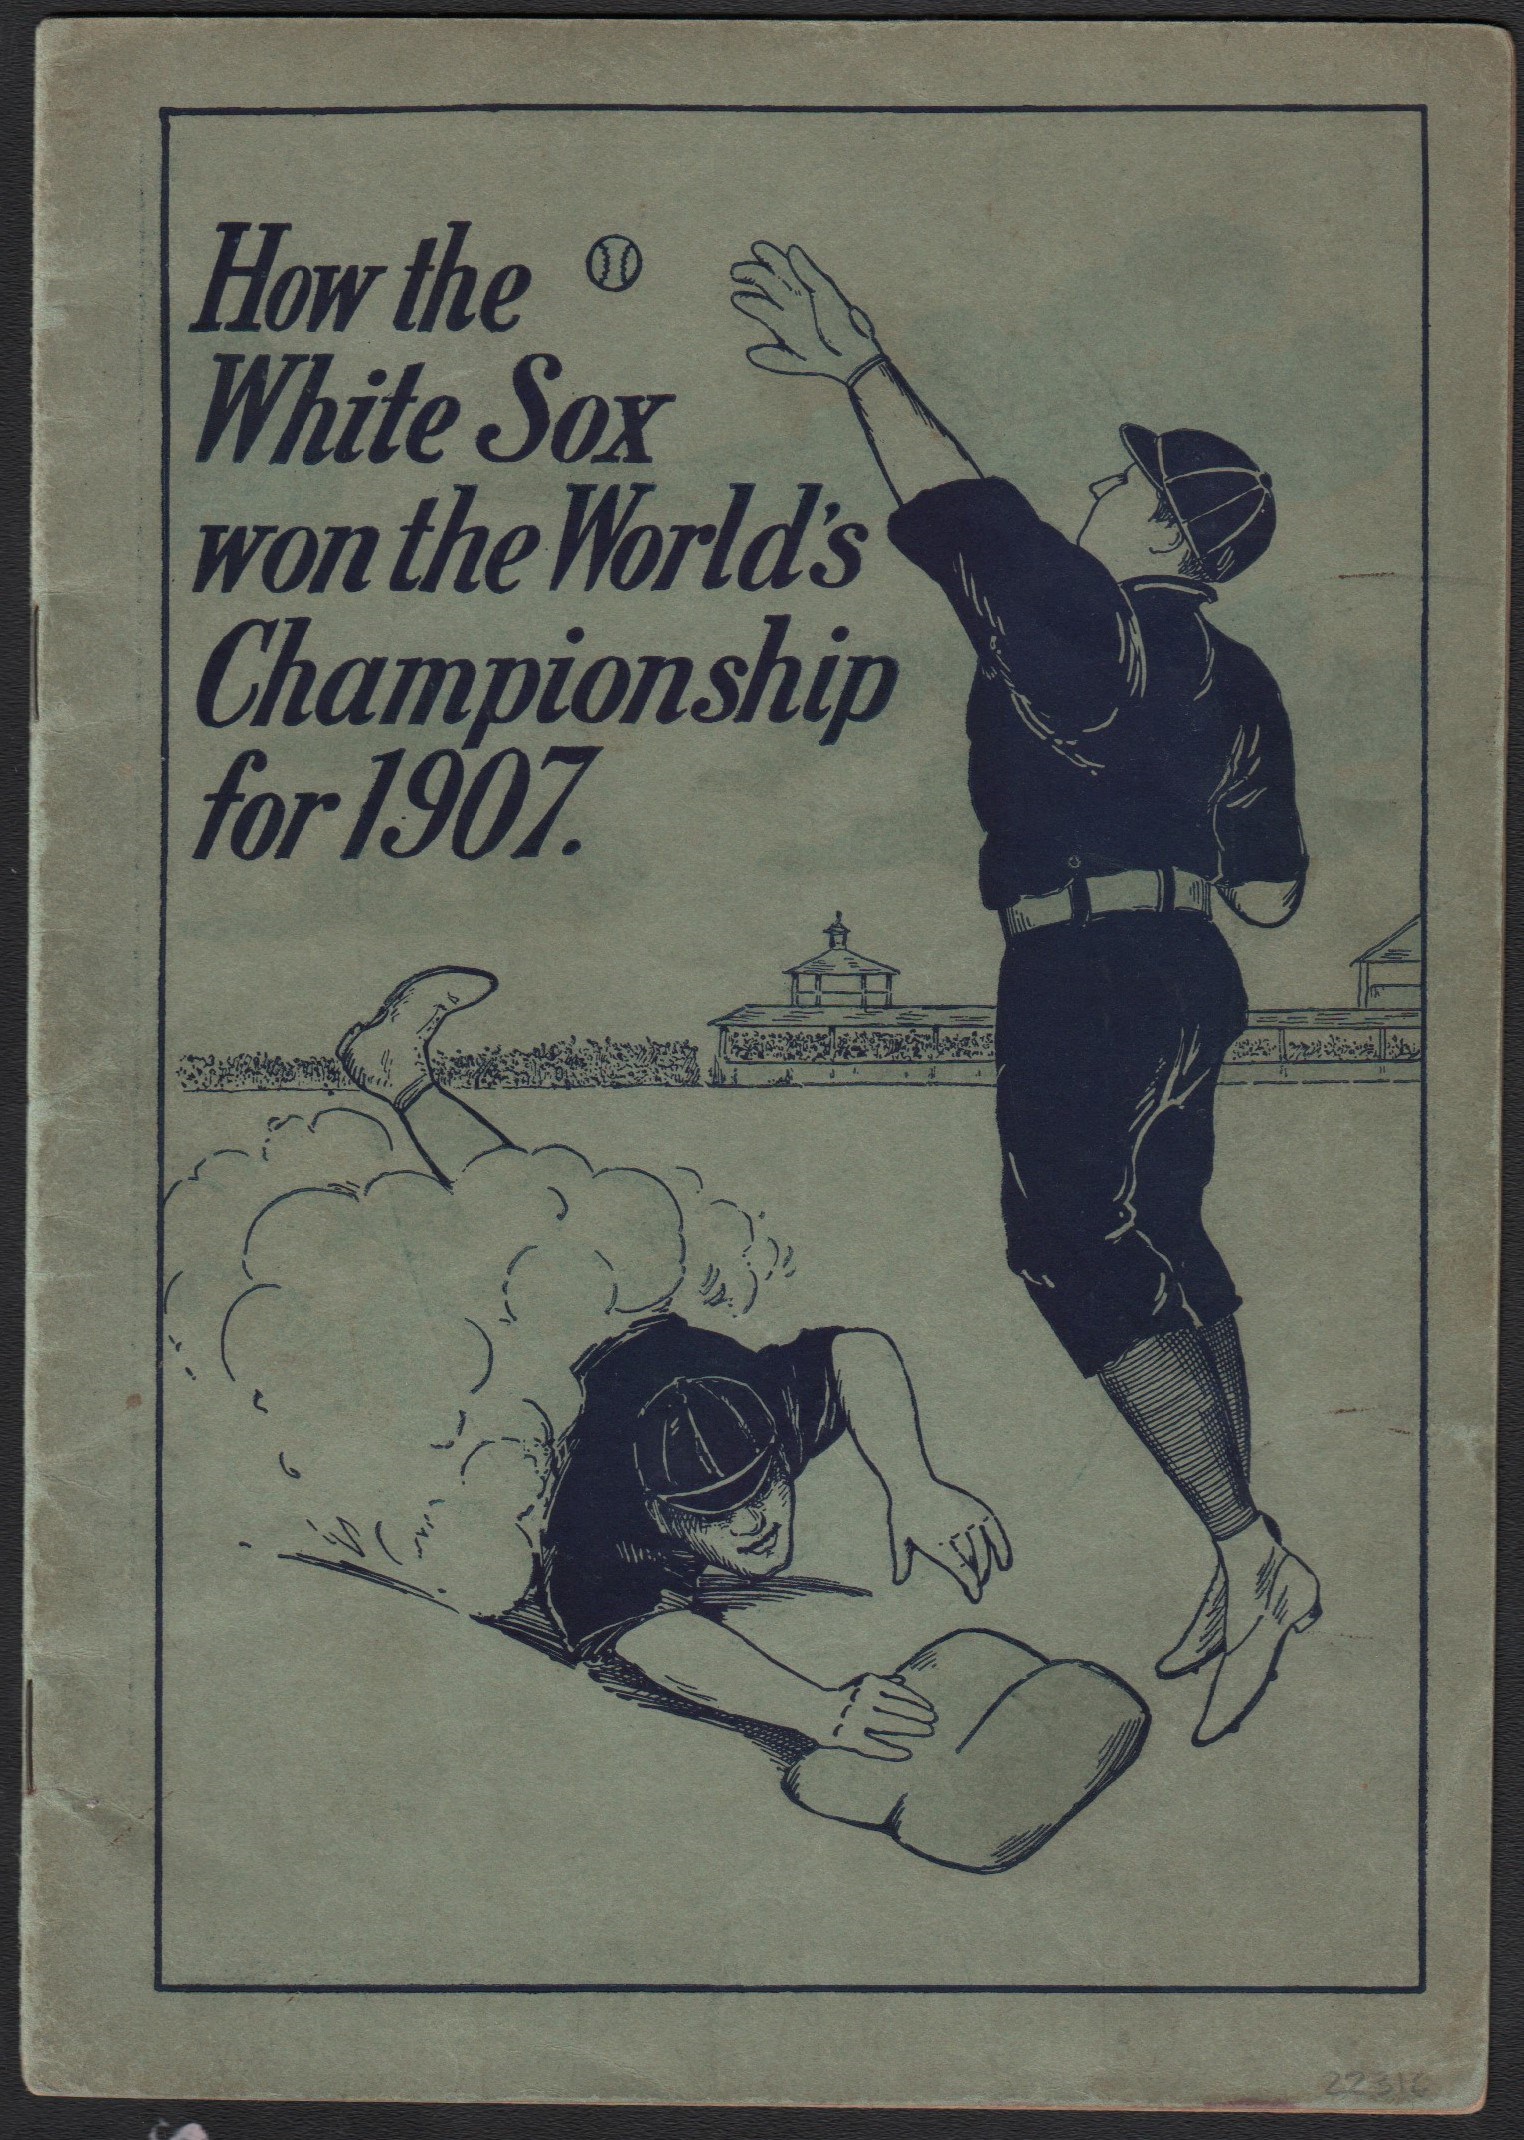 - How the White Sox won the World's Championship for 1907